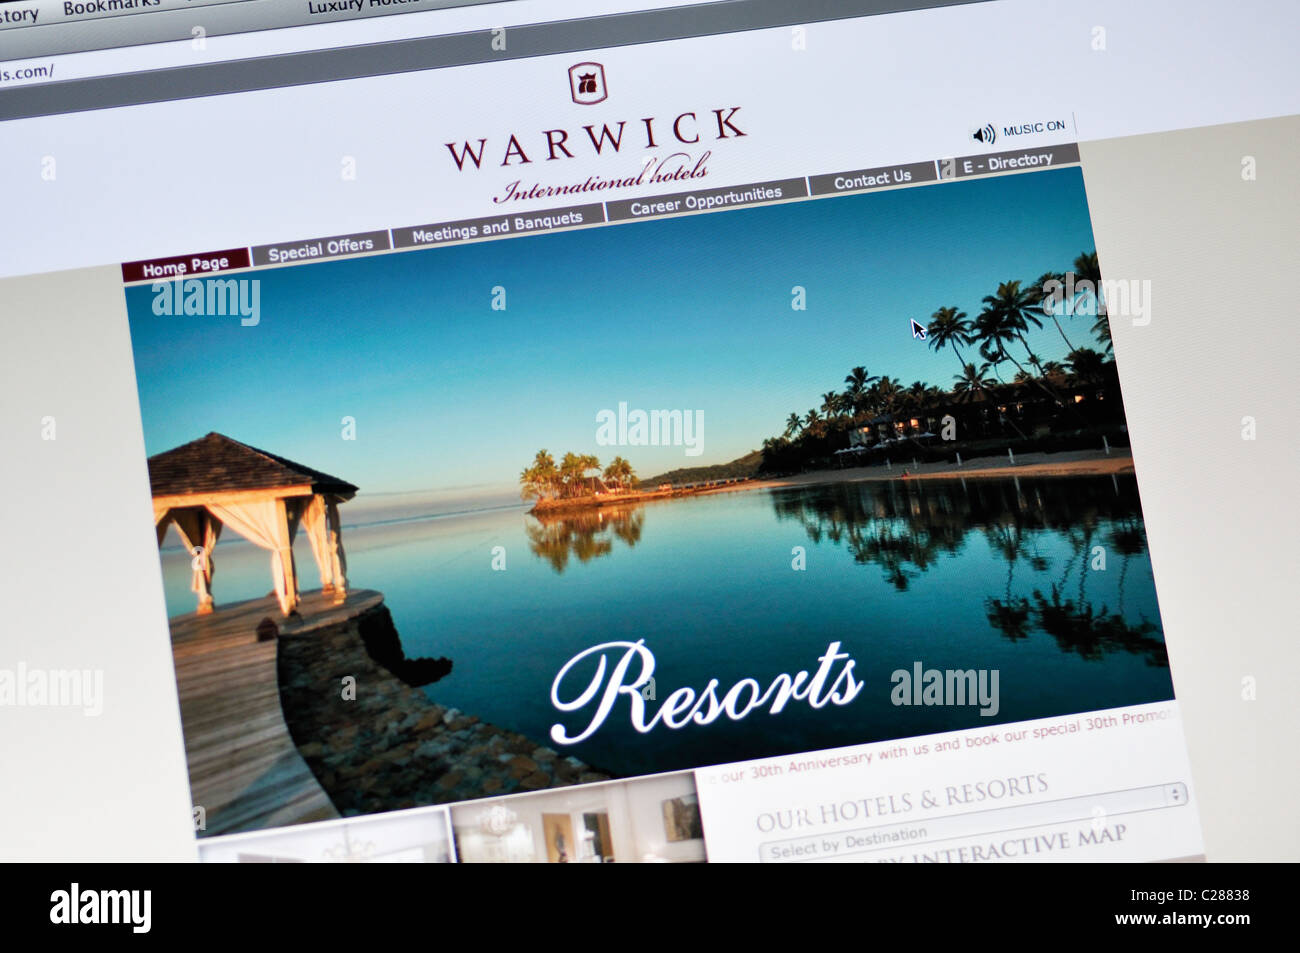 Warwick hotels and resorts website Banque D'Images